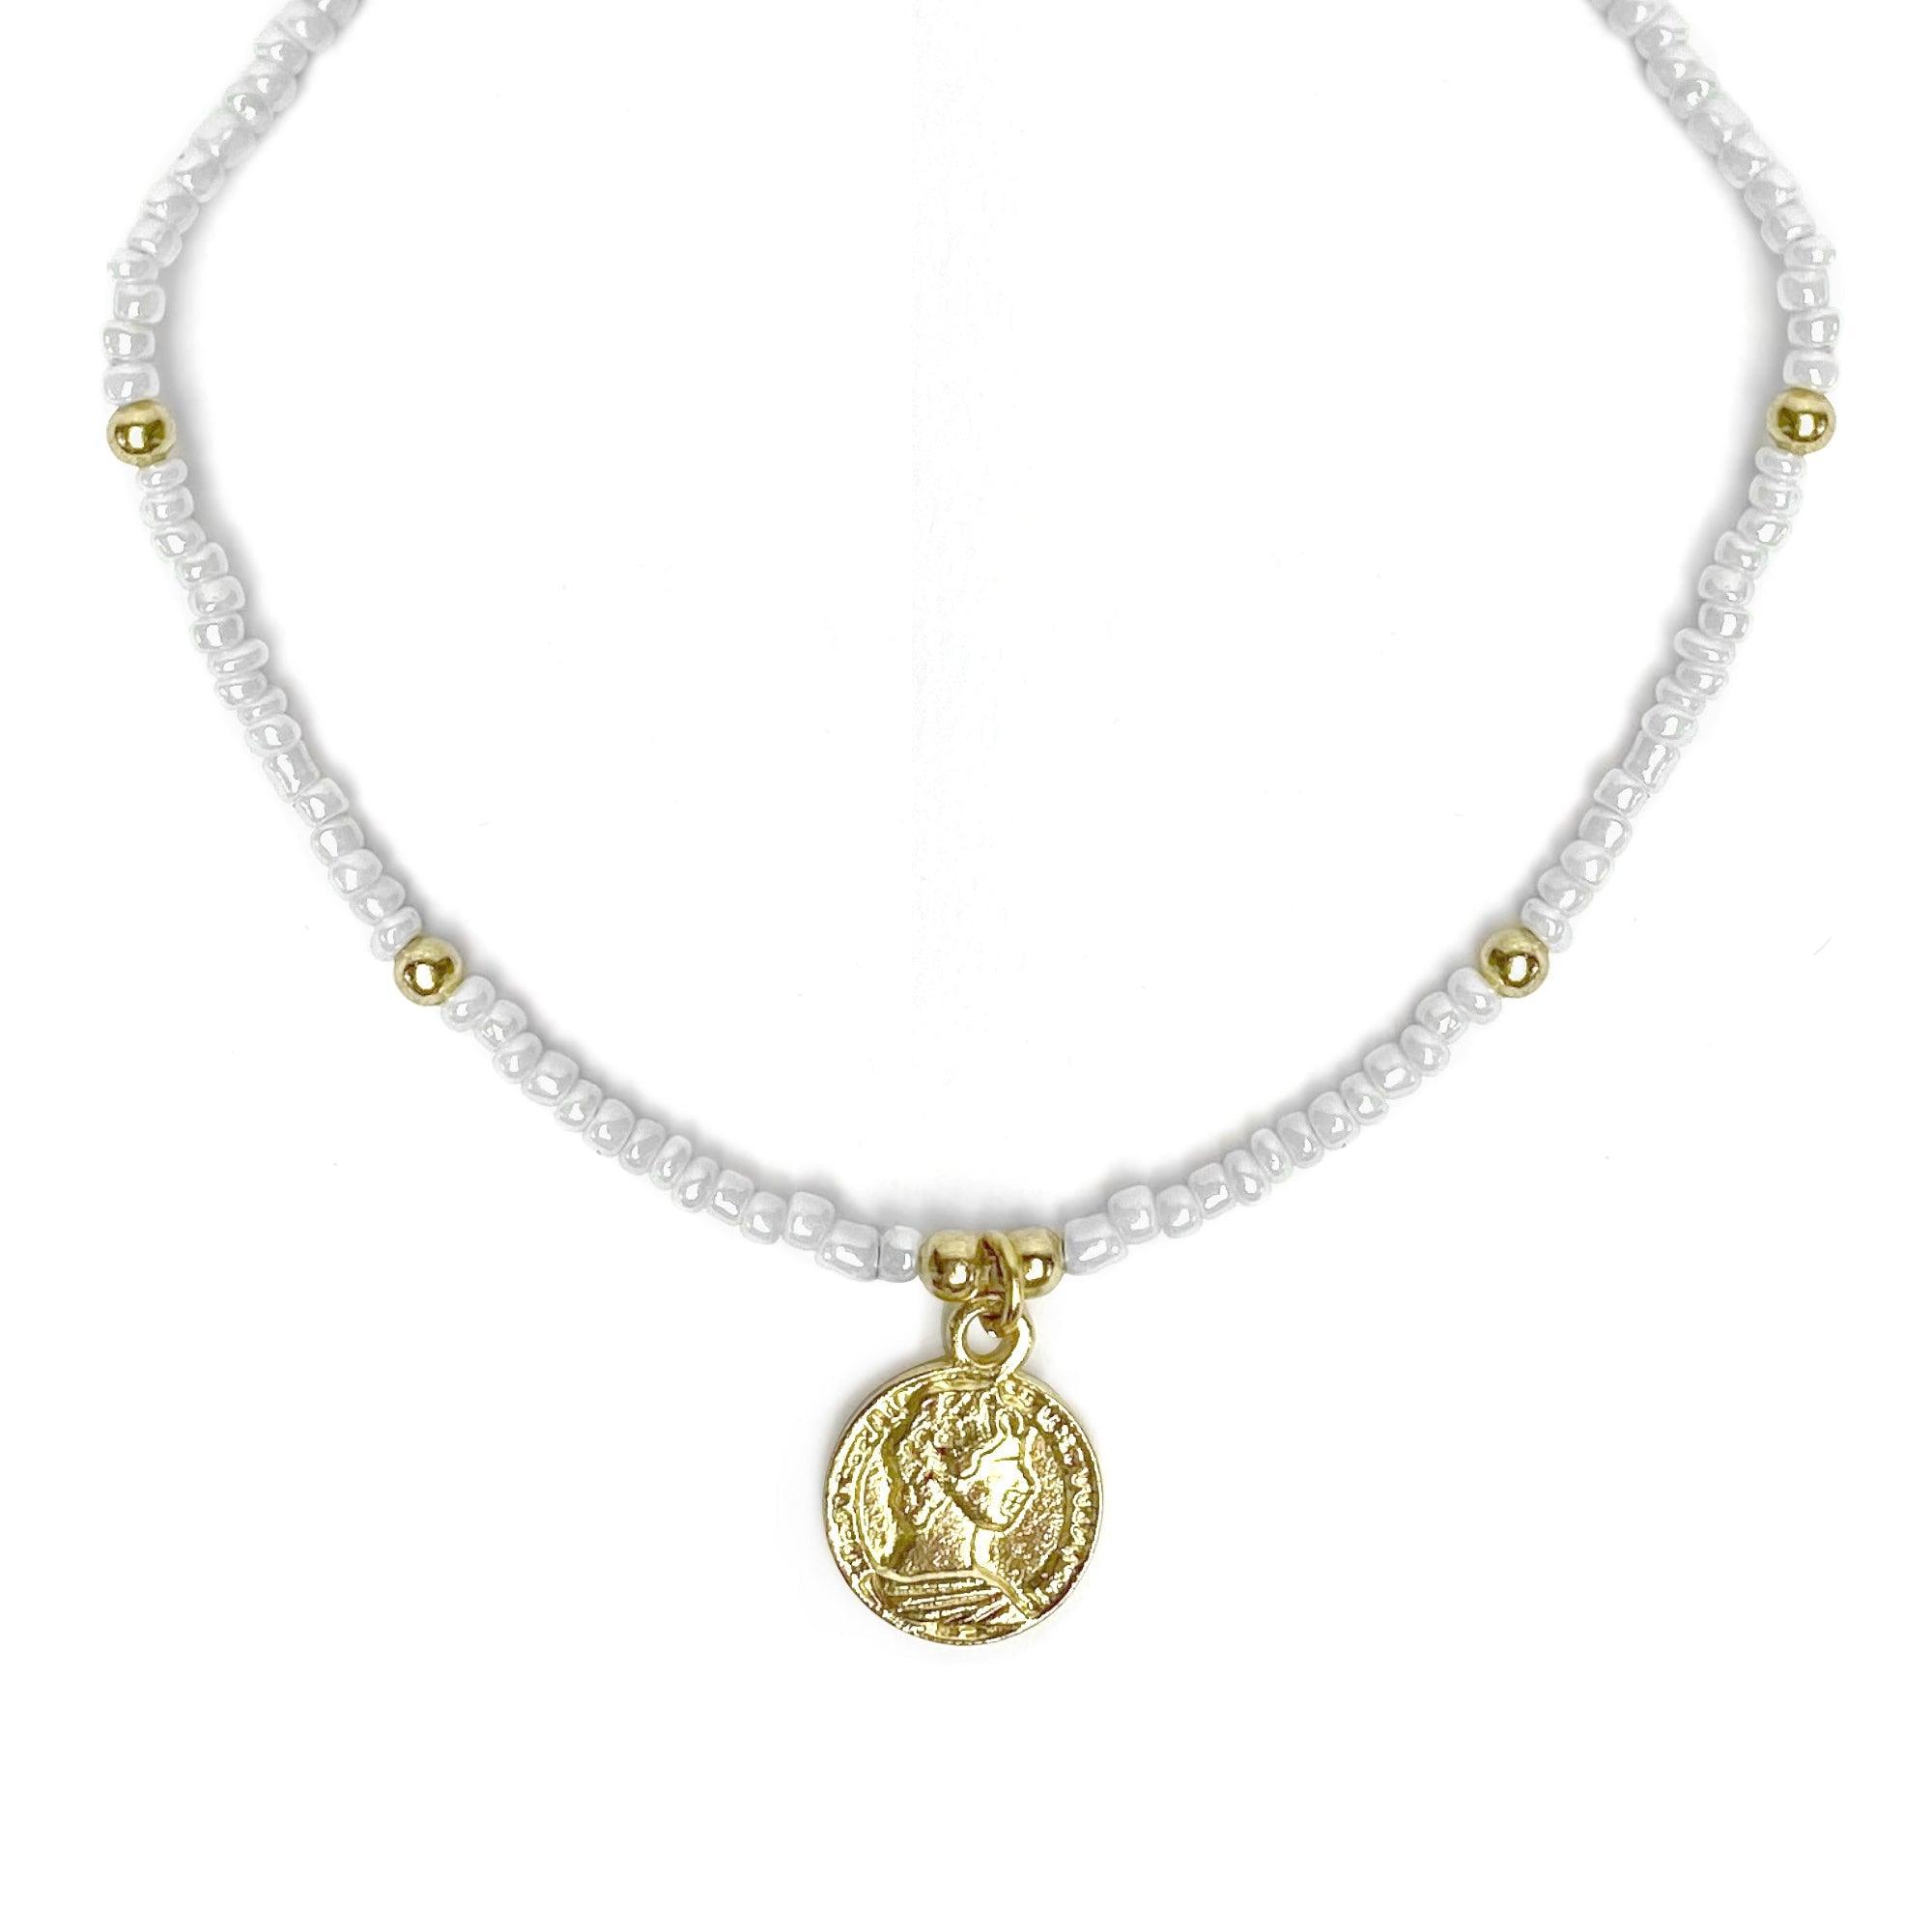 White Glass Bead Choker with Brass Coin Pendant - Flyclothing LLC